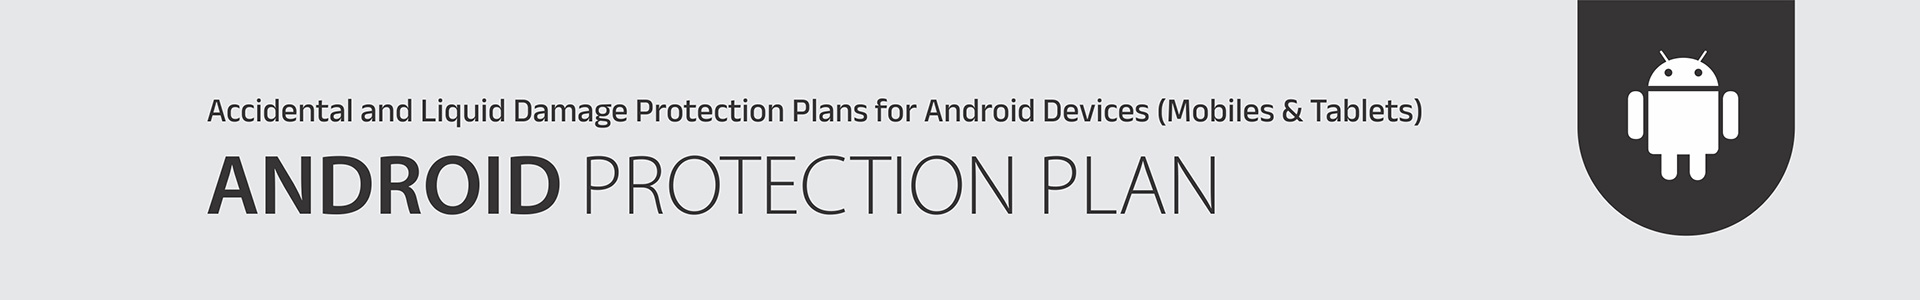 Android Protection Plan